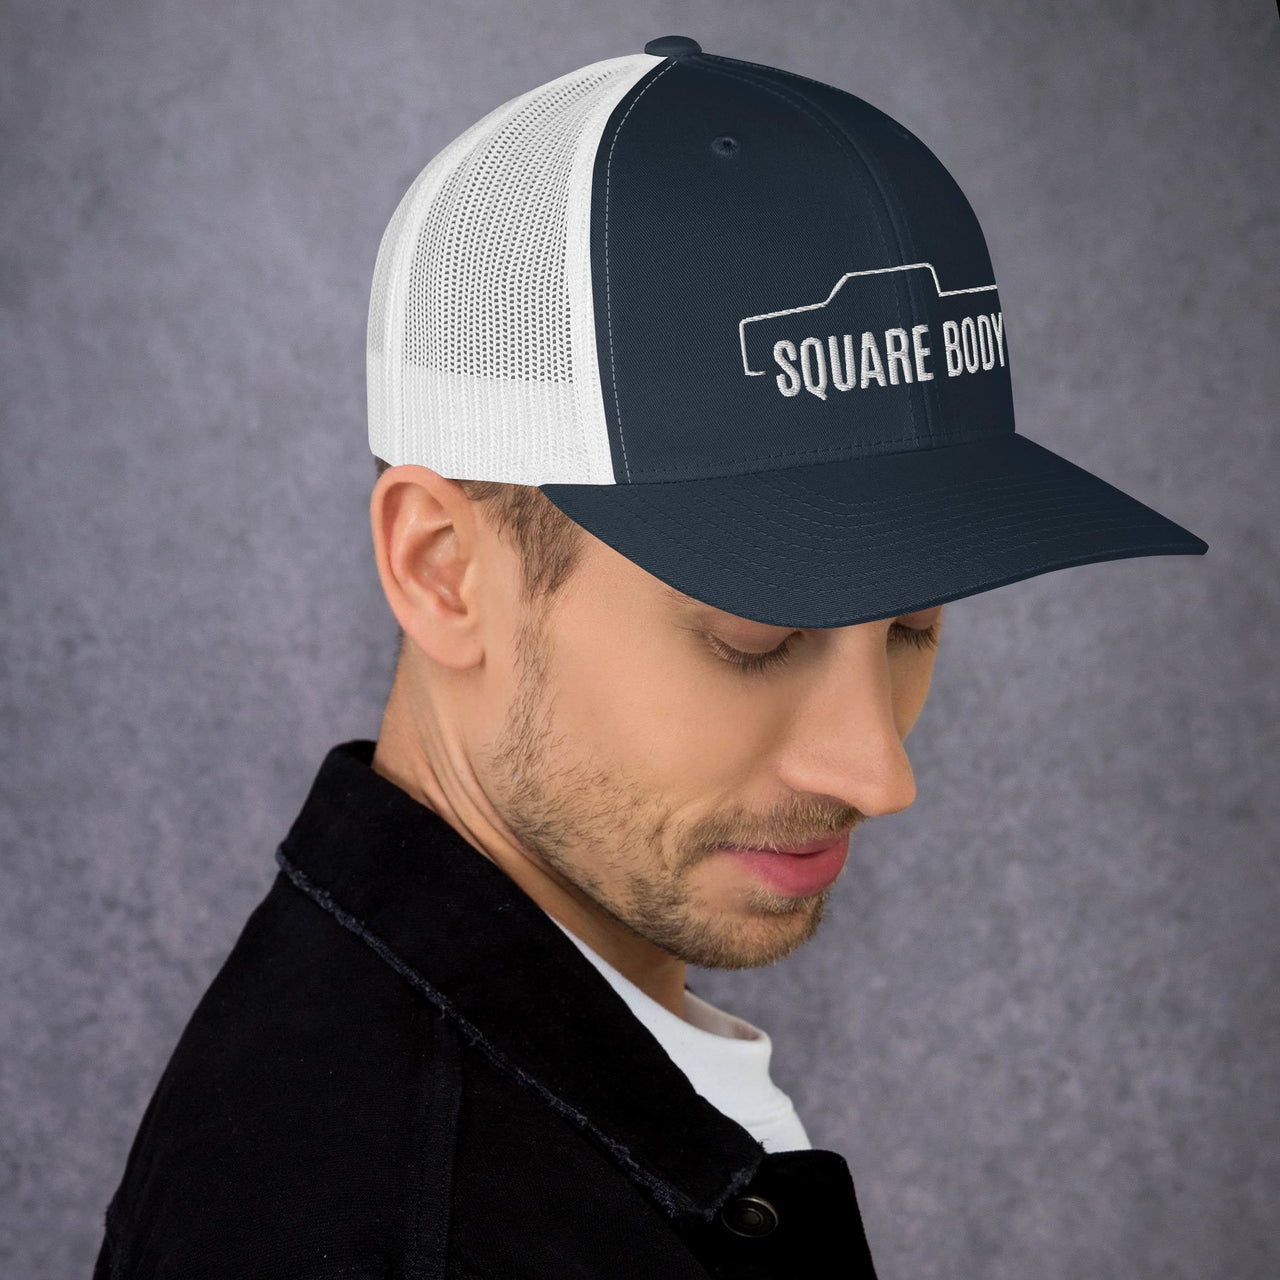 Man wearing a Crew Cab Square Body Trucker Hat From Aggressive Thread in navy and white